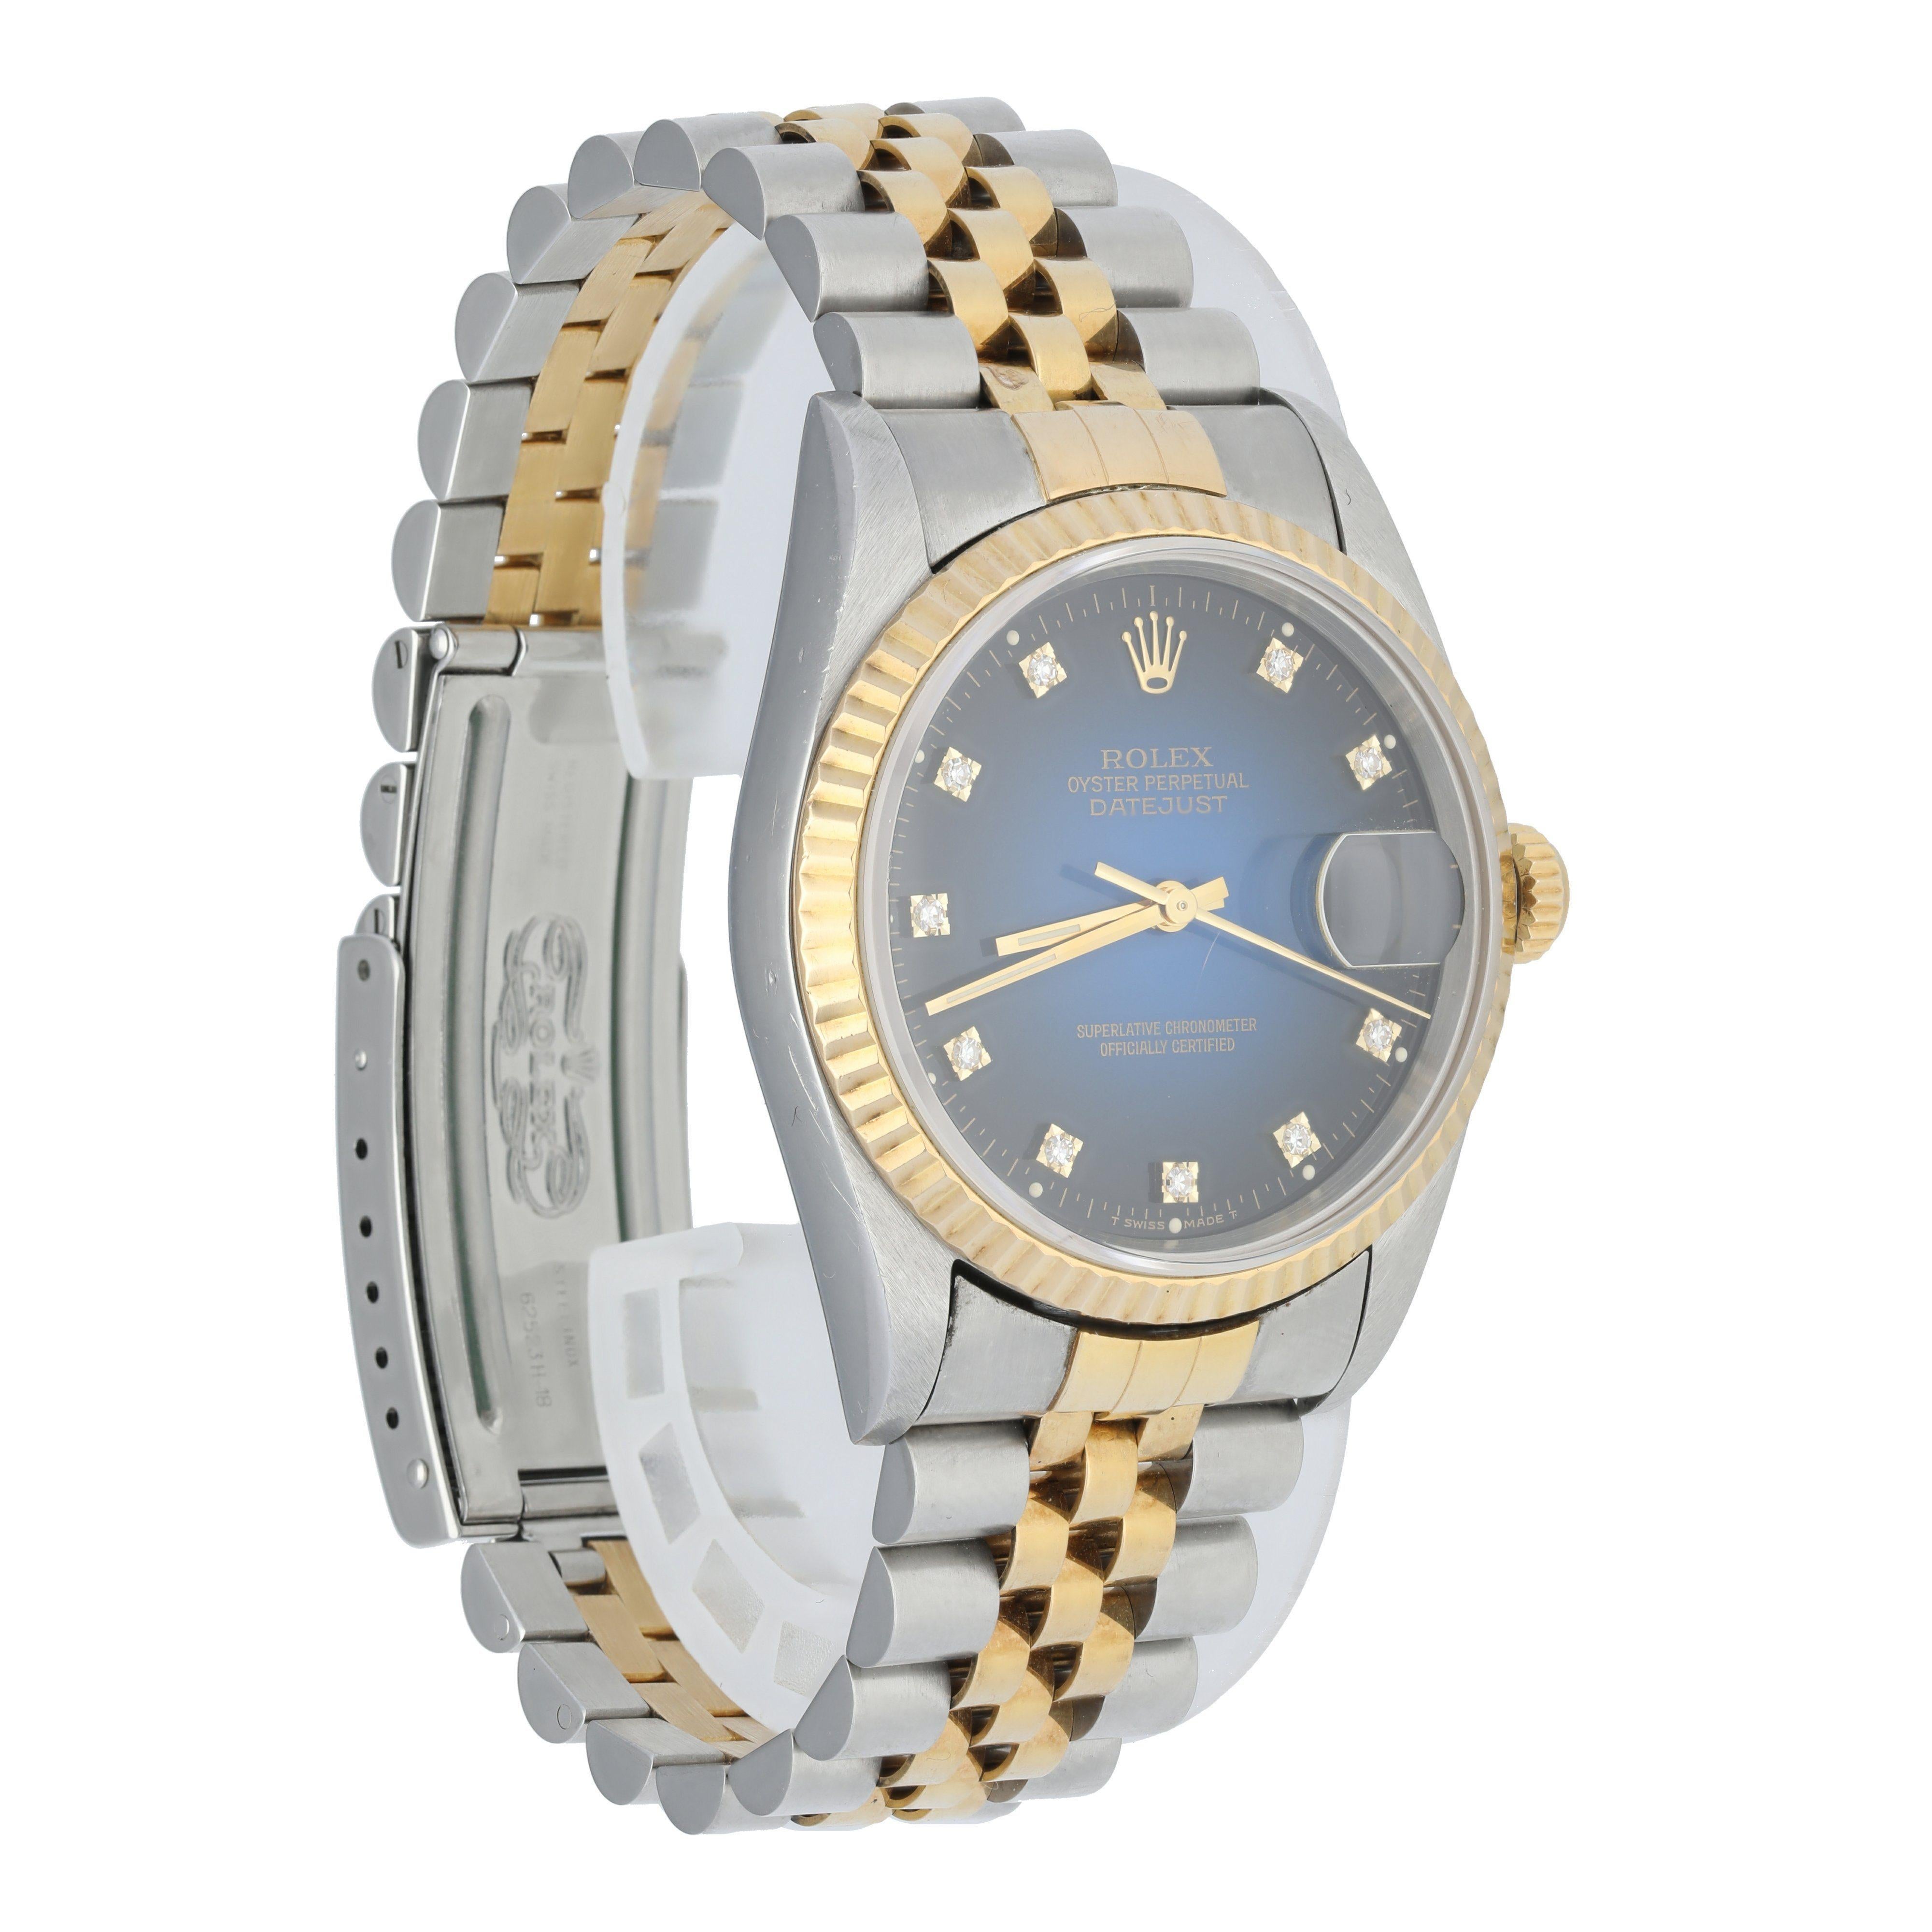 Rolex Datejust 16233 Diamond Vignette Dial Men's Watch In Excellent Condition For Sale In New York, NY